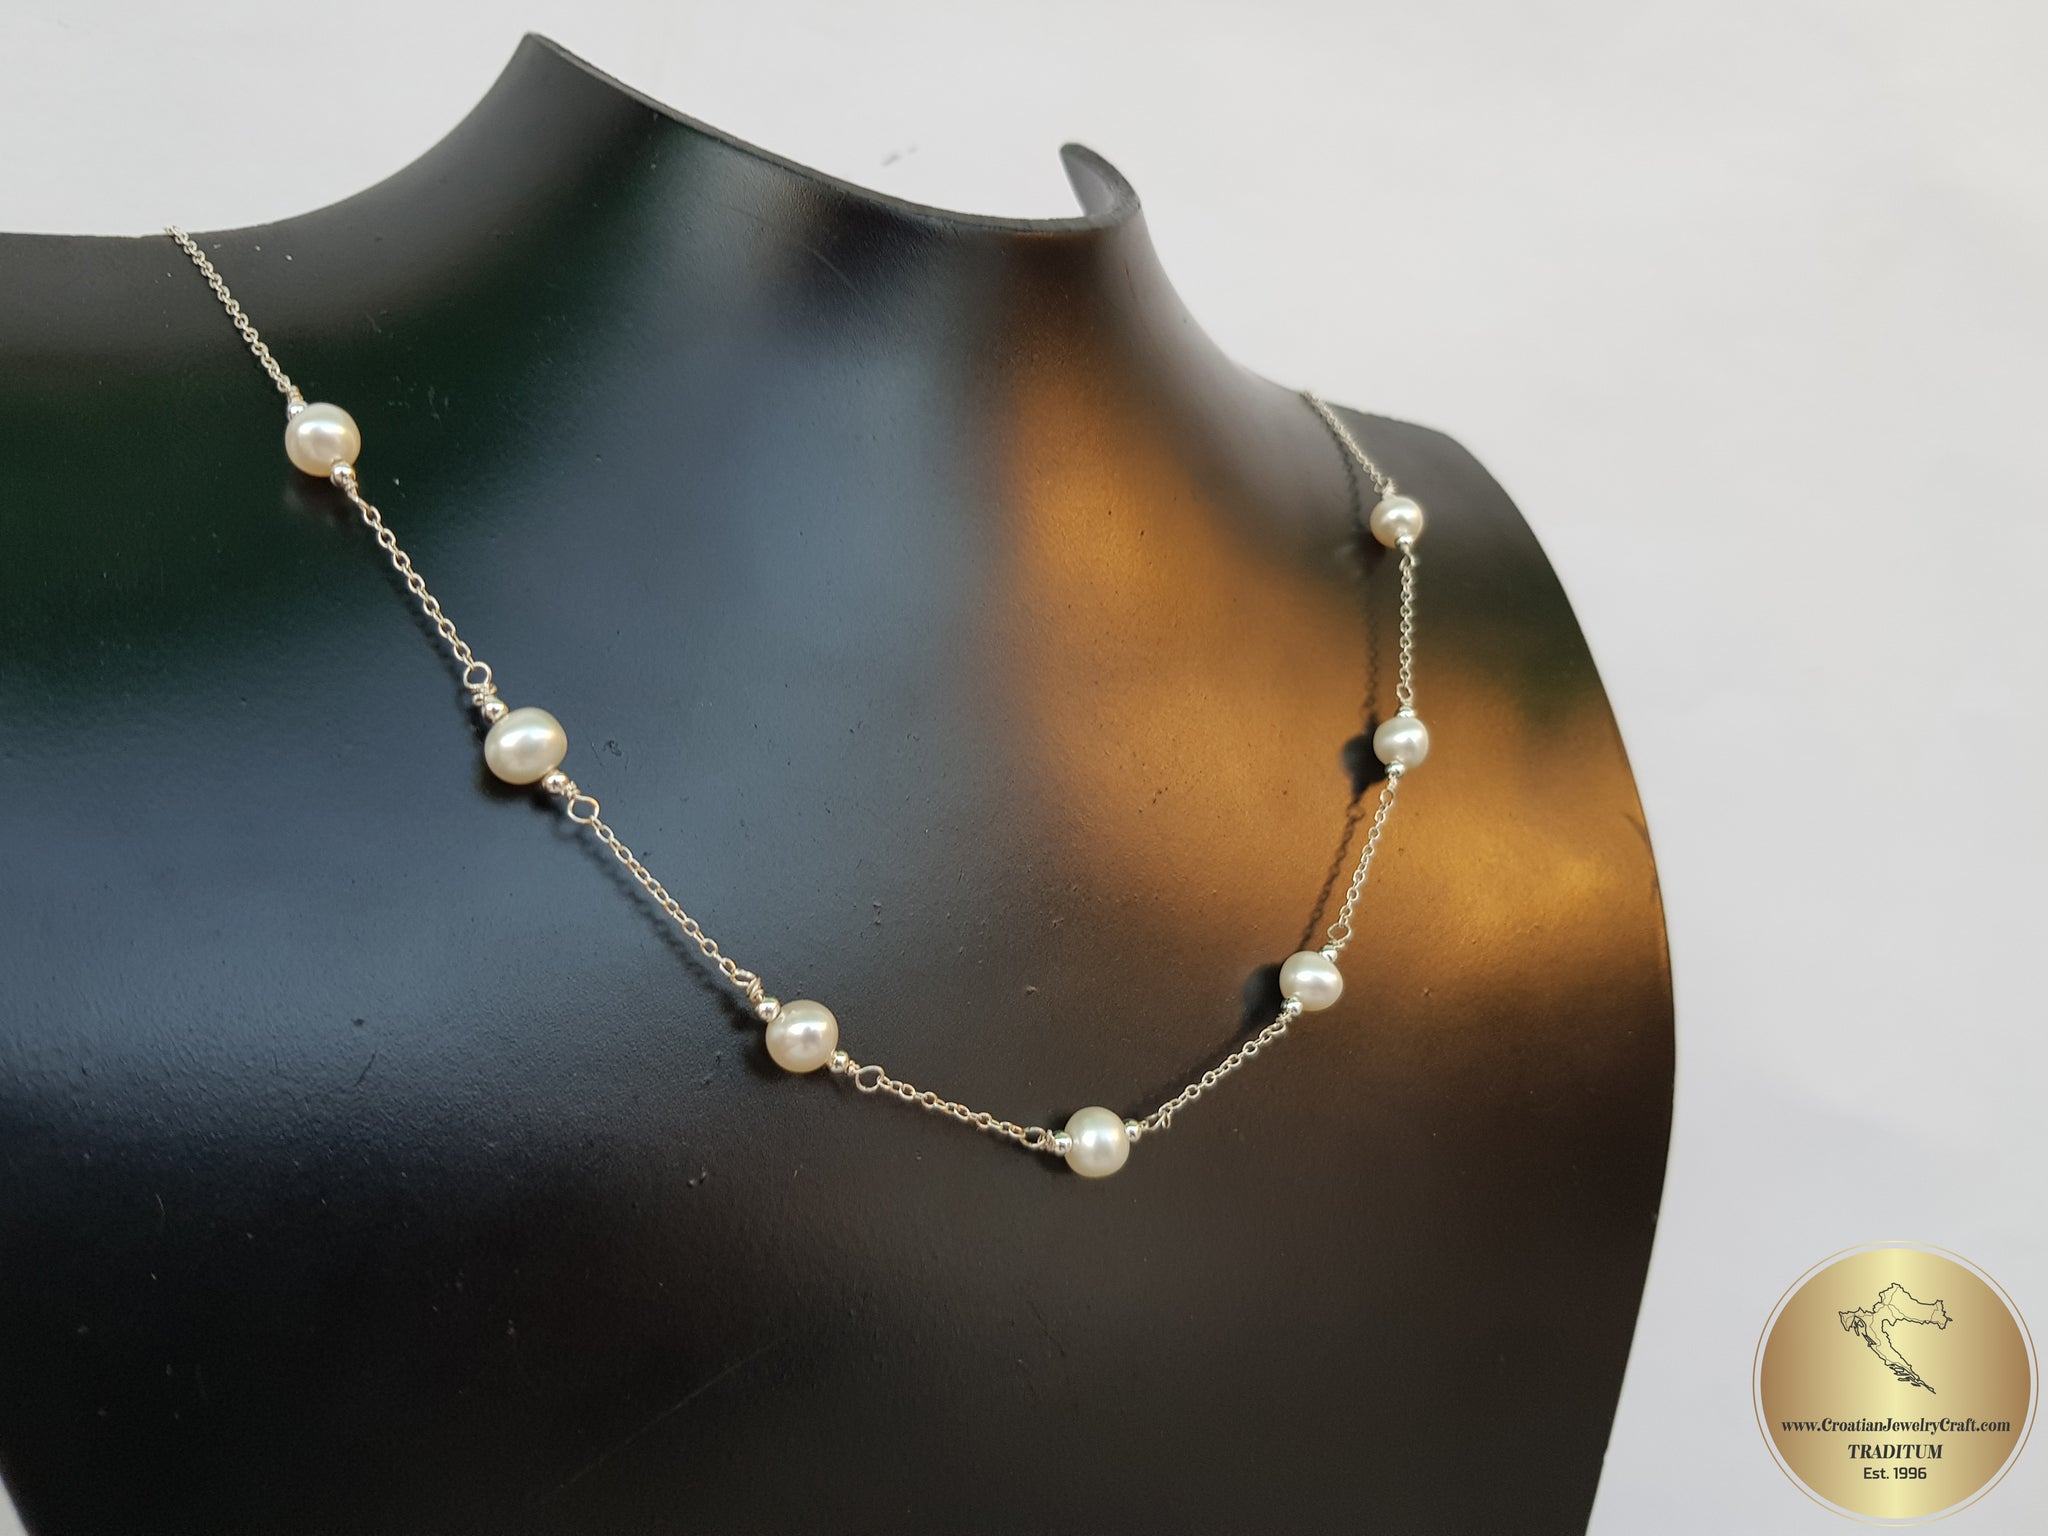 Amazon.com: Valentines Gifts, Pearl Necklace for Women, Festival 18K Gold  Vermeil Choker Necklace Beach Necklaces Women Handmade Jewelry for her (Pearl  Necklace-A) : Handmade Products